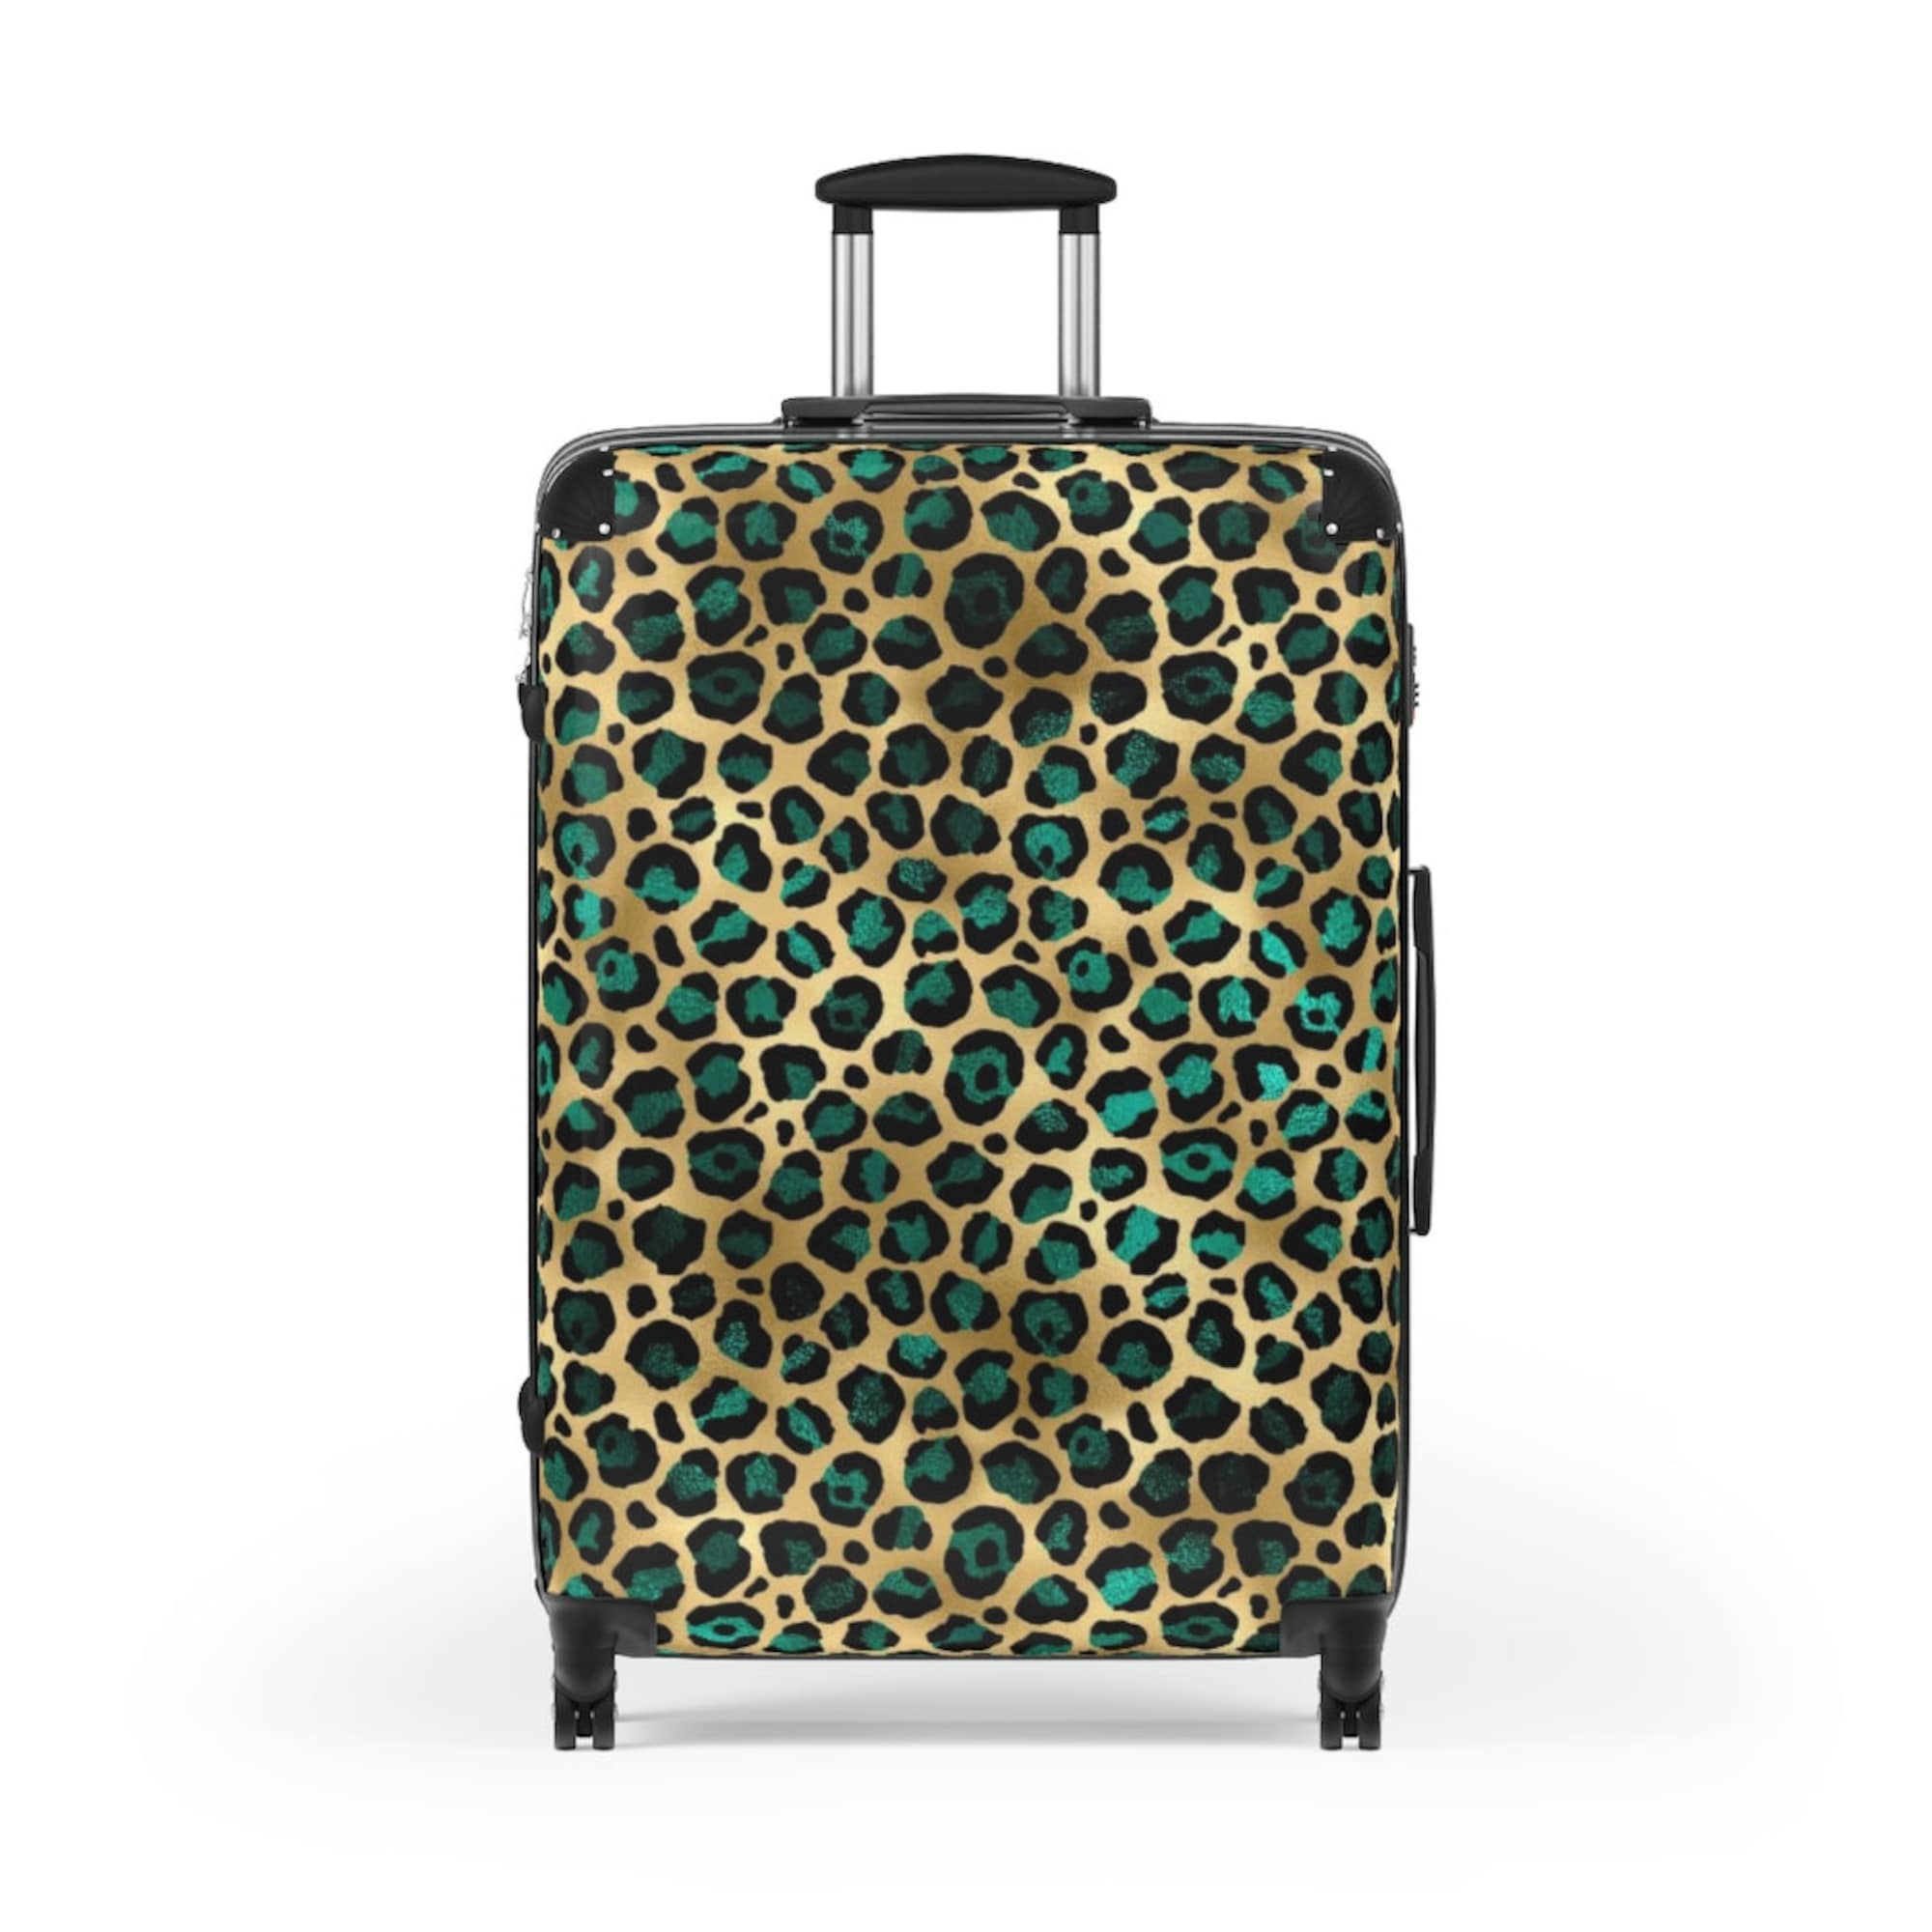 Discover The Green & Gold Leopard Suitcase